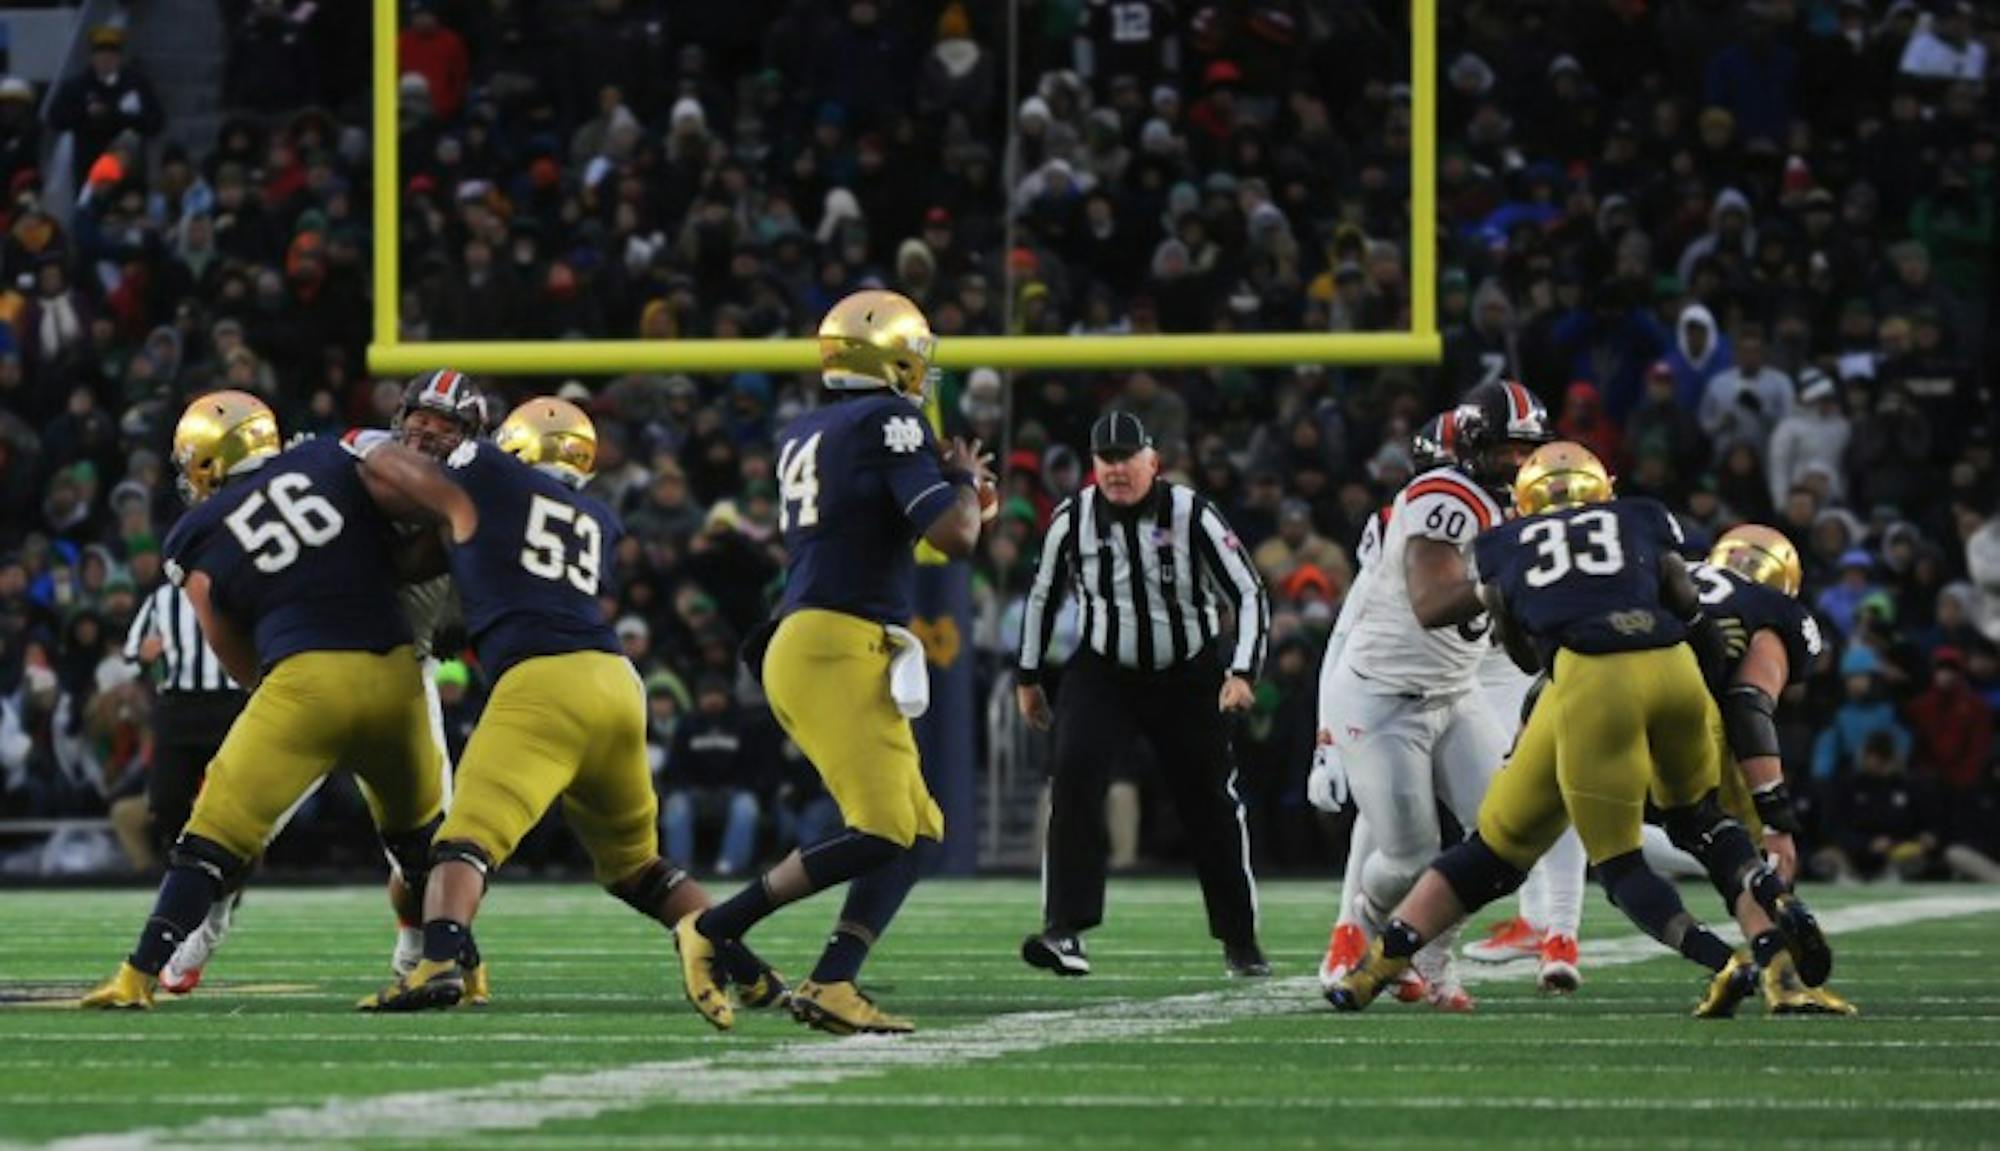 Irish junior quarterback DeShone Kizer drops back in the pocket during Saturday's 34-31 loss to Virginia Tech on Saturday. Kizer threw for 235 yards and two touchdowns in the contest.